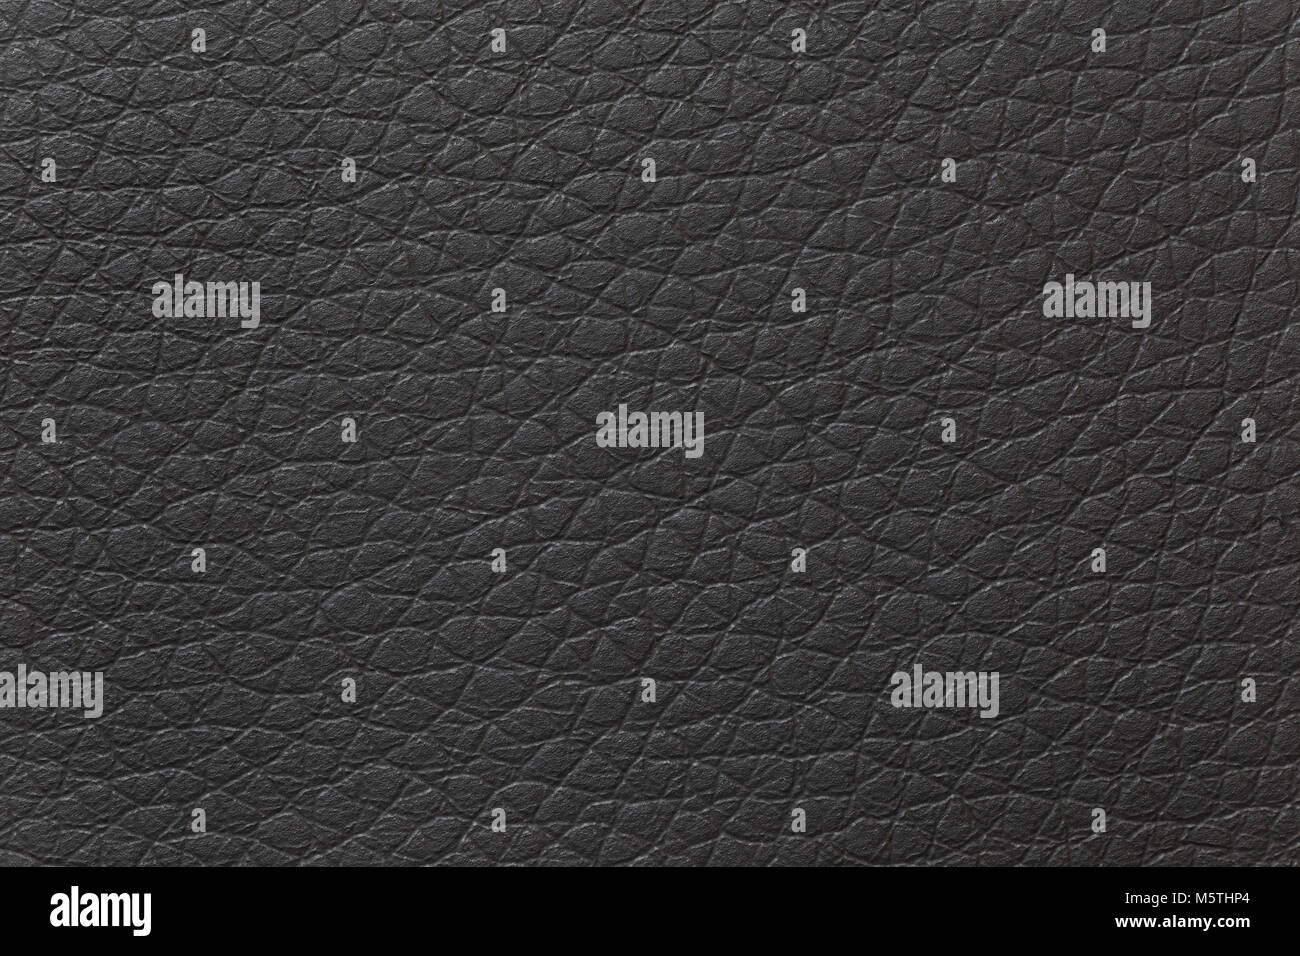 Detail of black leather texture. Stock Photo